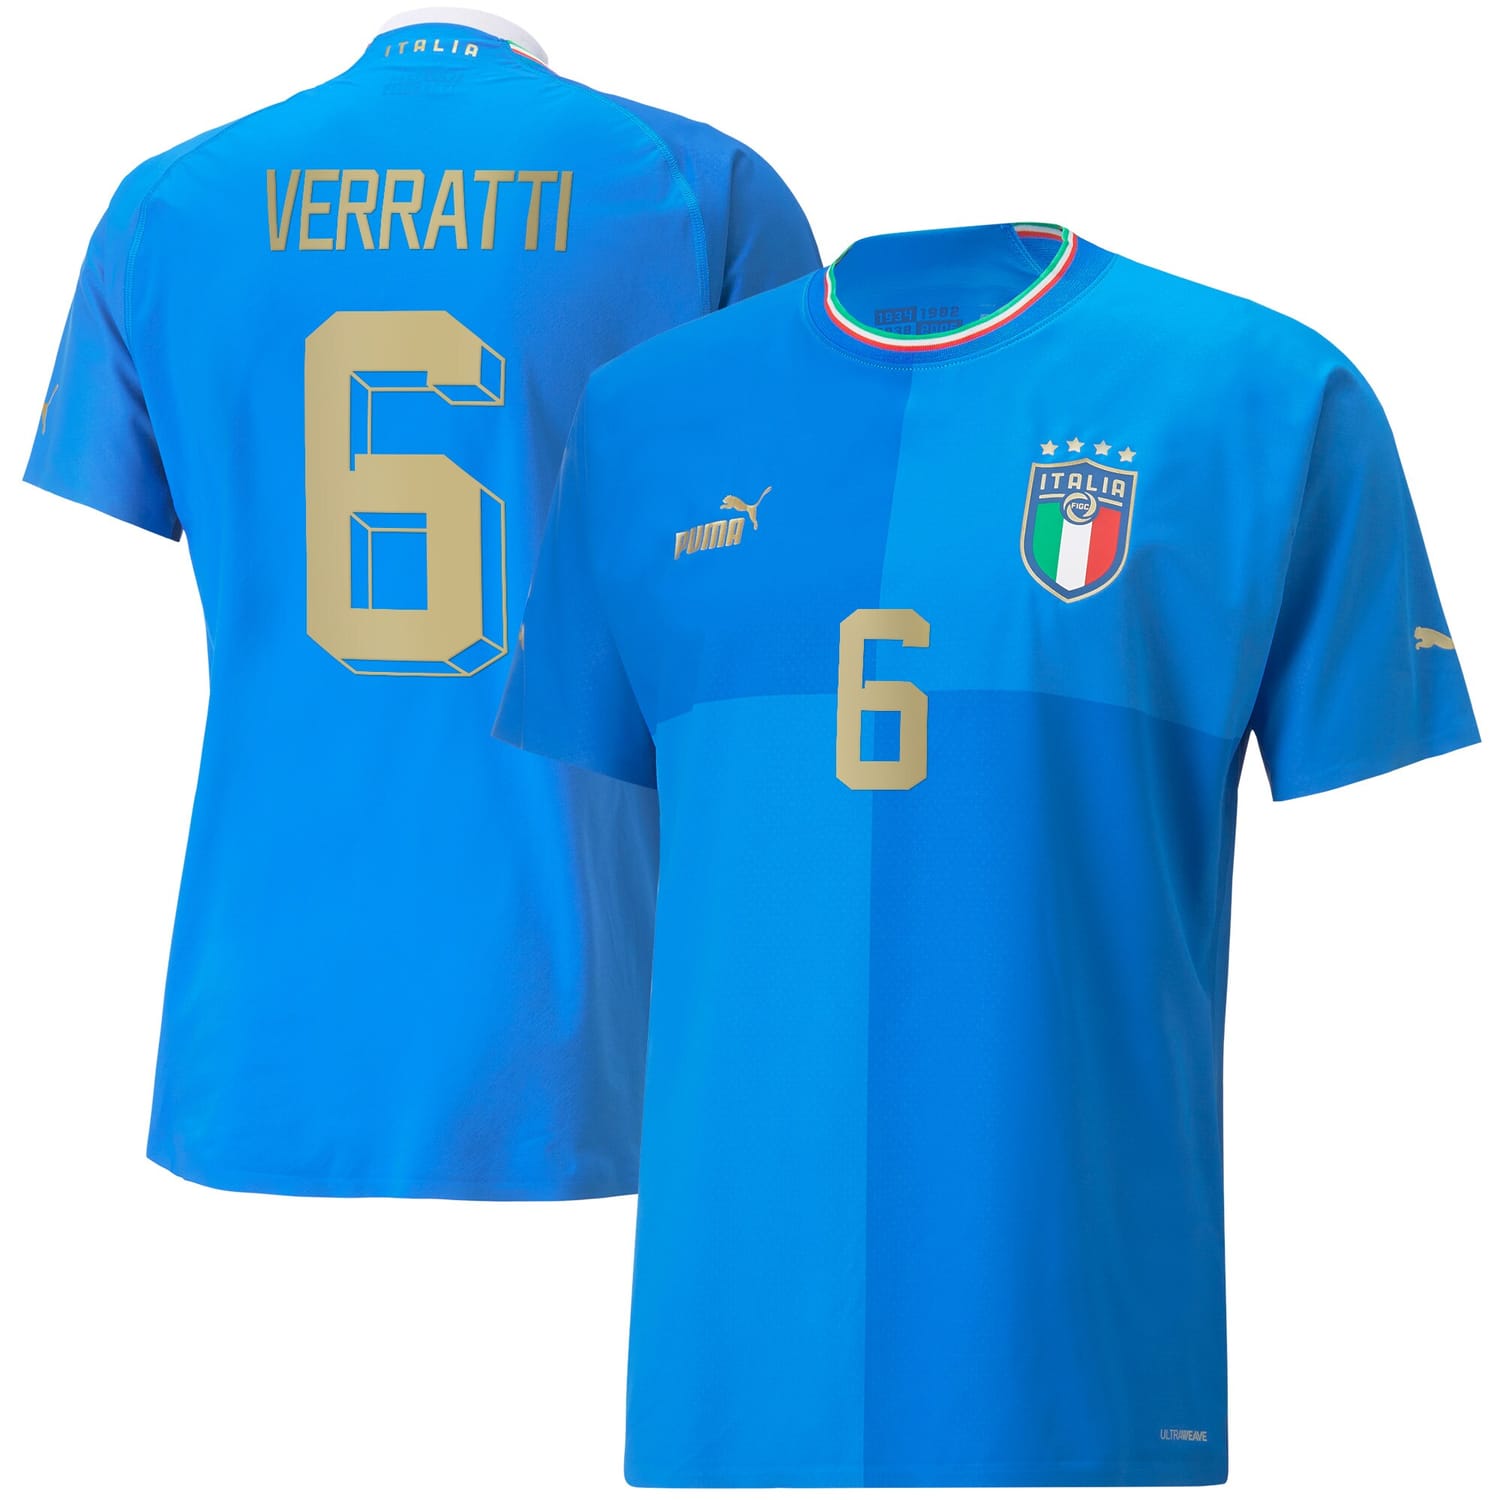 Italy National Team Home Authentic Jersey Shirt Blue 2022-23 player Marco Verratti printing for Men